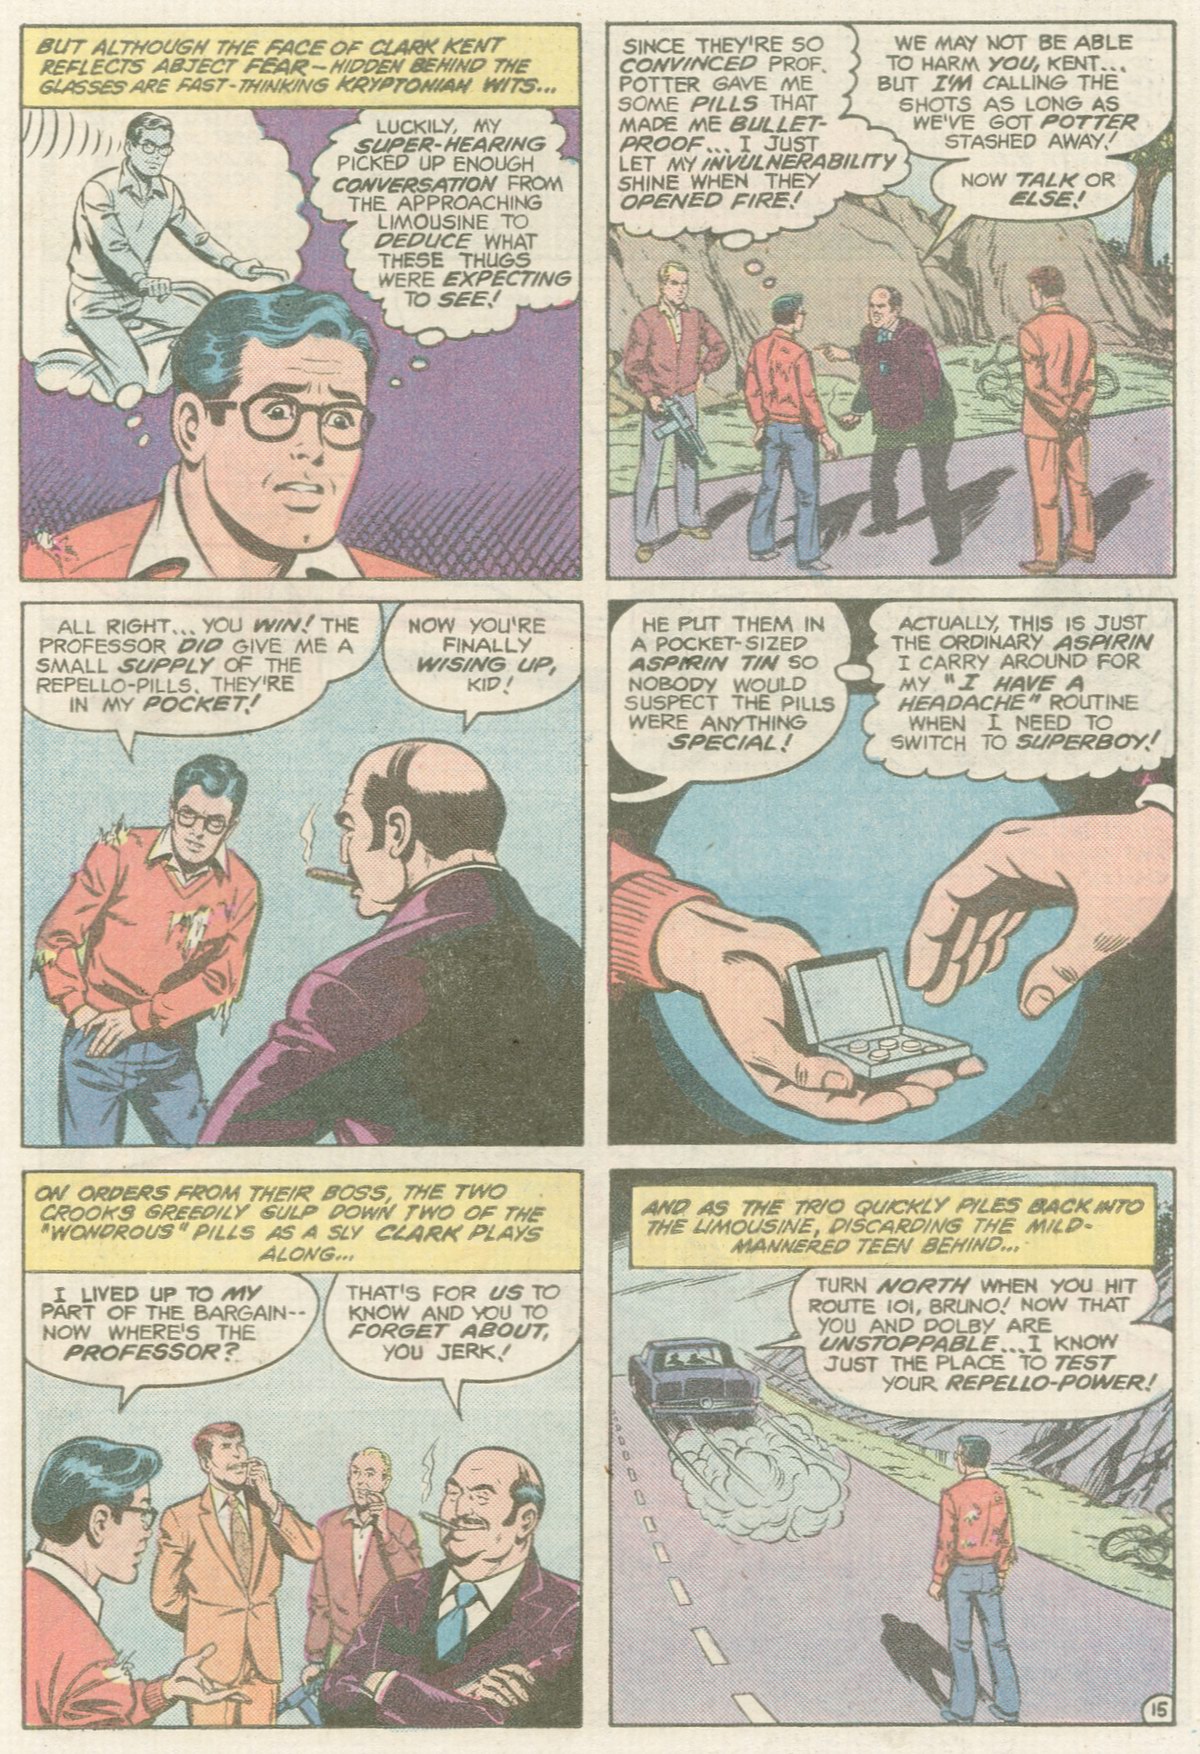 The New Adventures of Superboy 26 Page 15